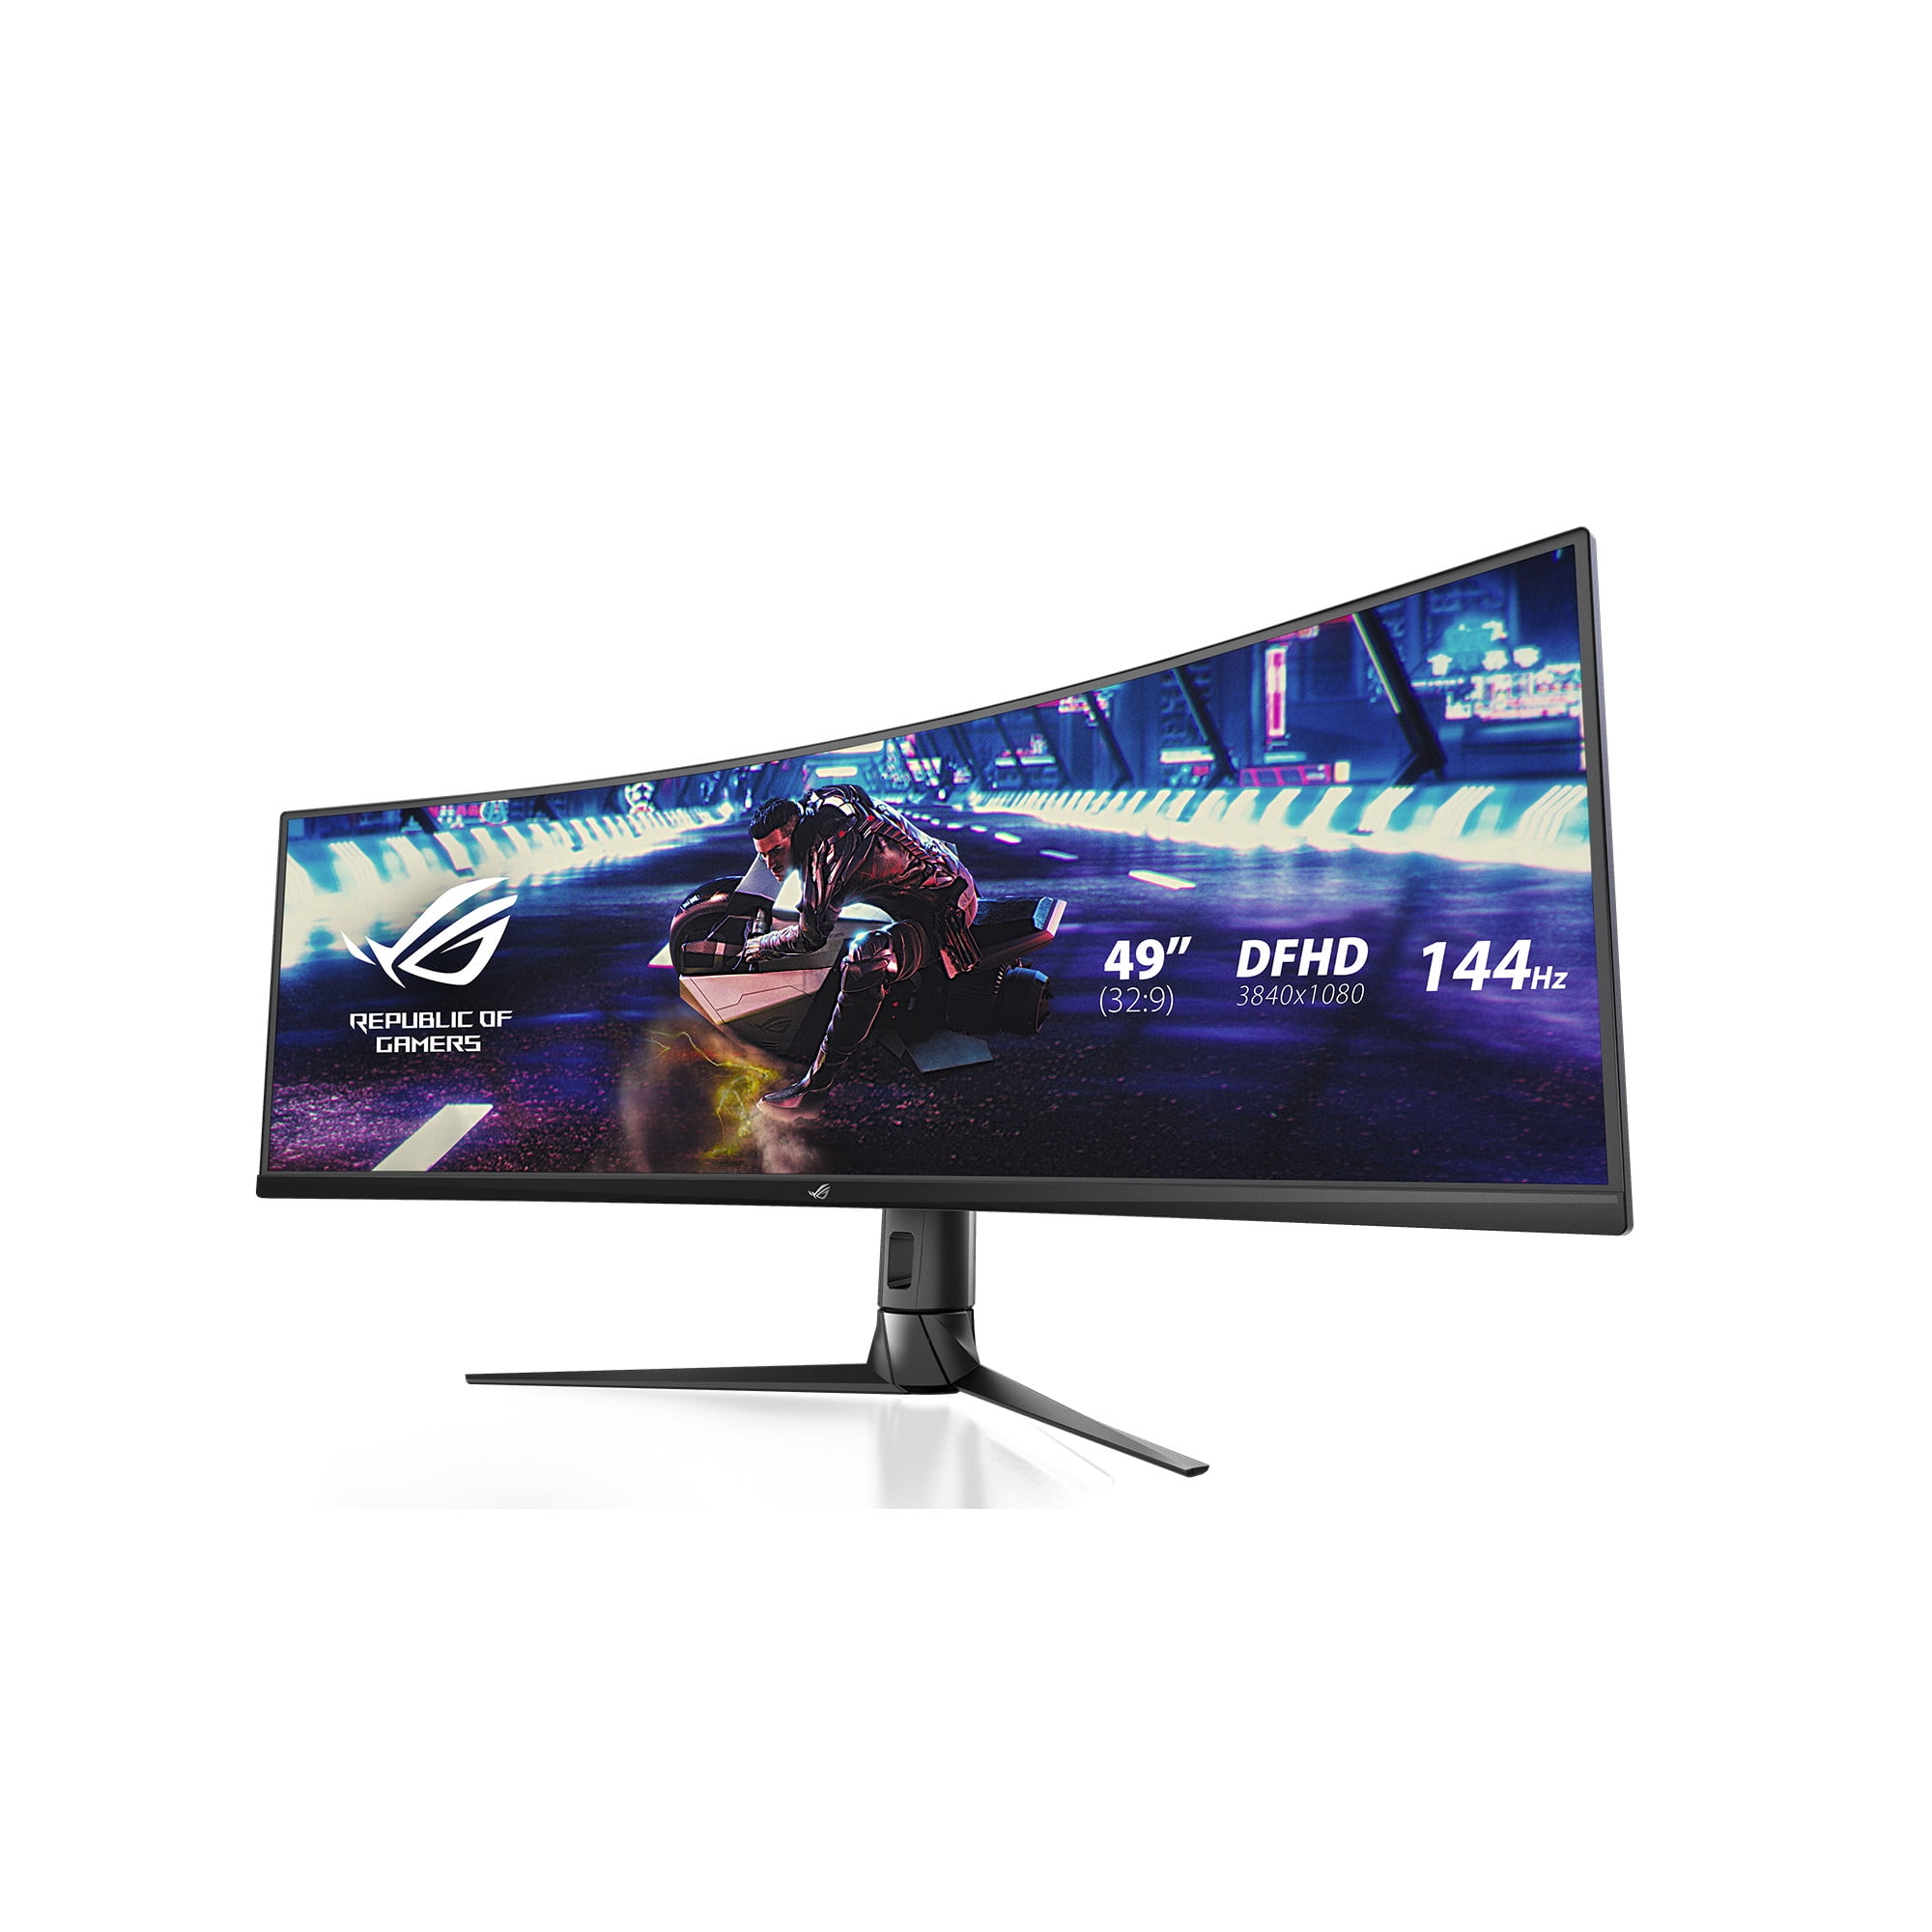 Photo 1 of Asus ROG Strix XG49VQ 49” Curved Gaming FreeSync Monitor 144Hz Dual Full HD HDR Eye Care with DP HDMI Black
